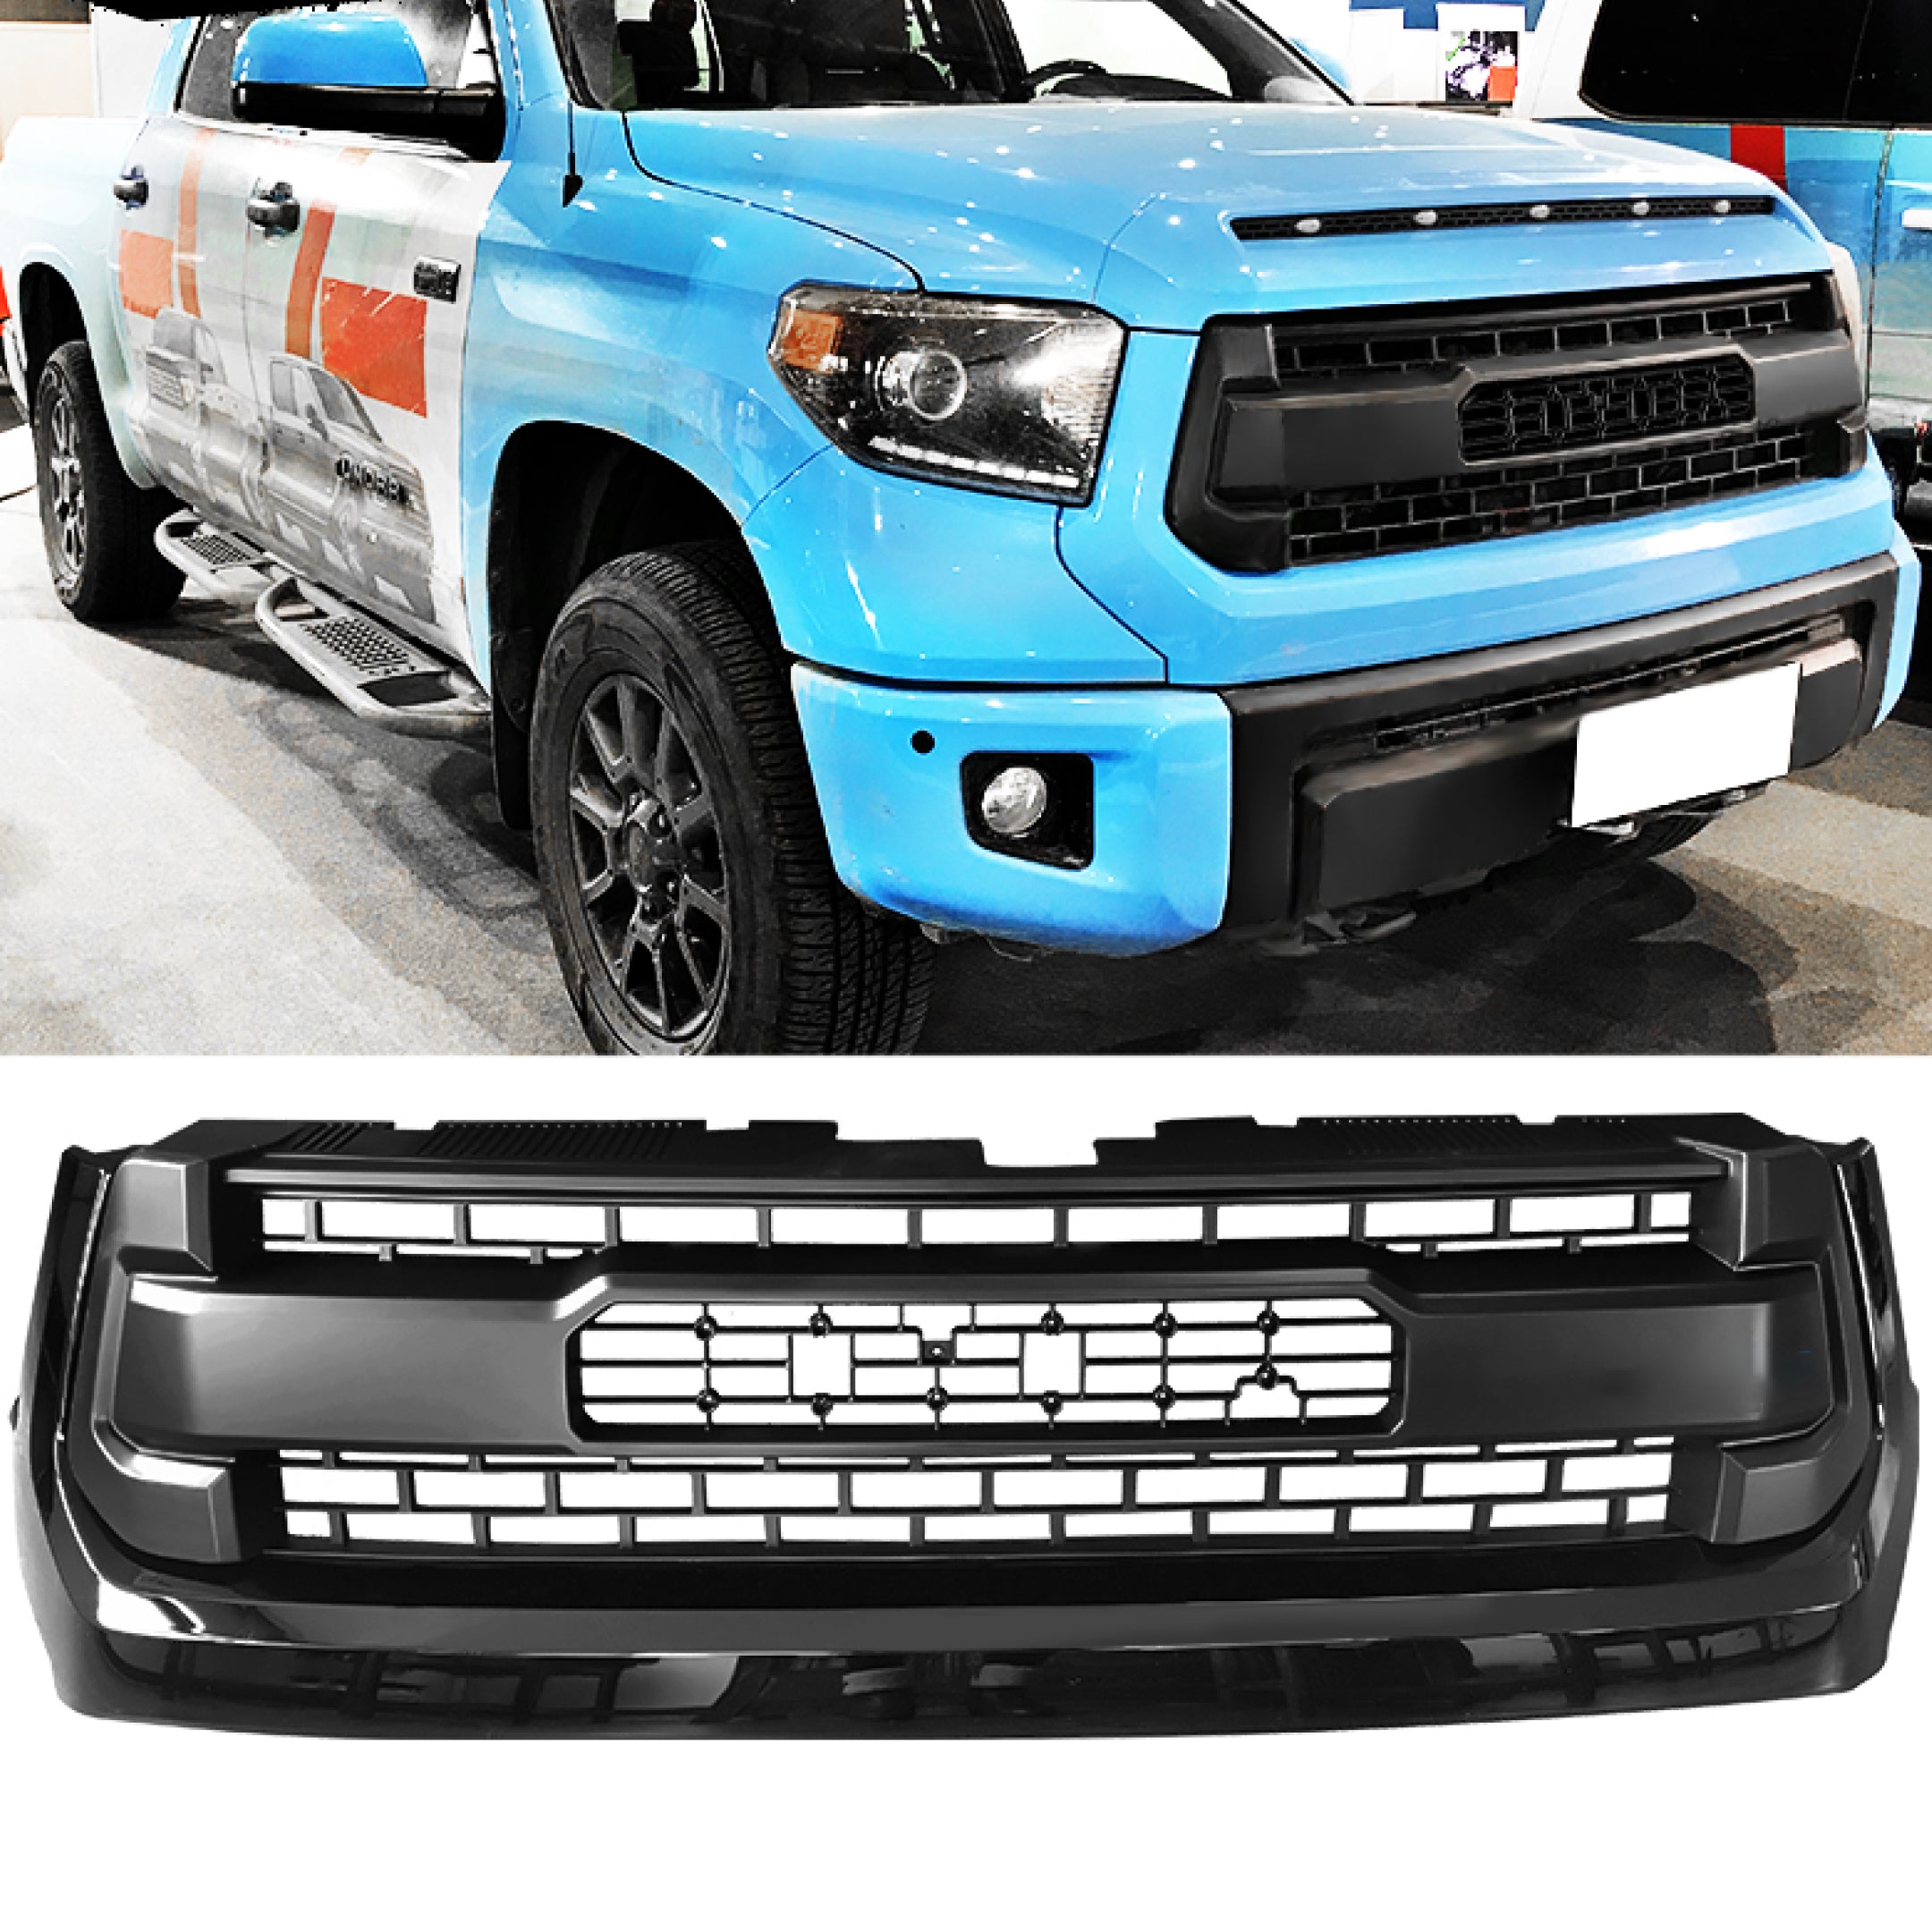 TRD Style Front Grill / Grill Fits 2014-2017 Toyota Tundra